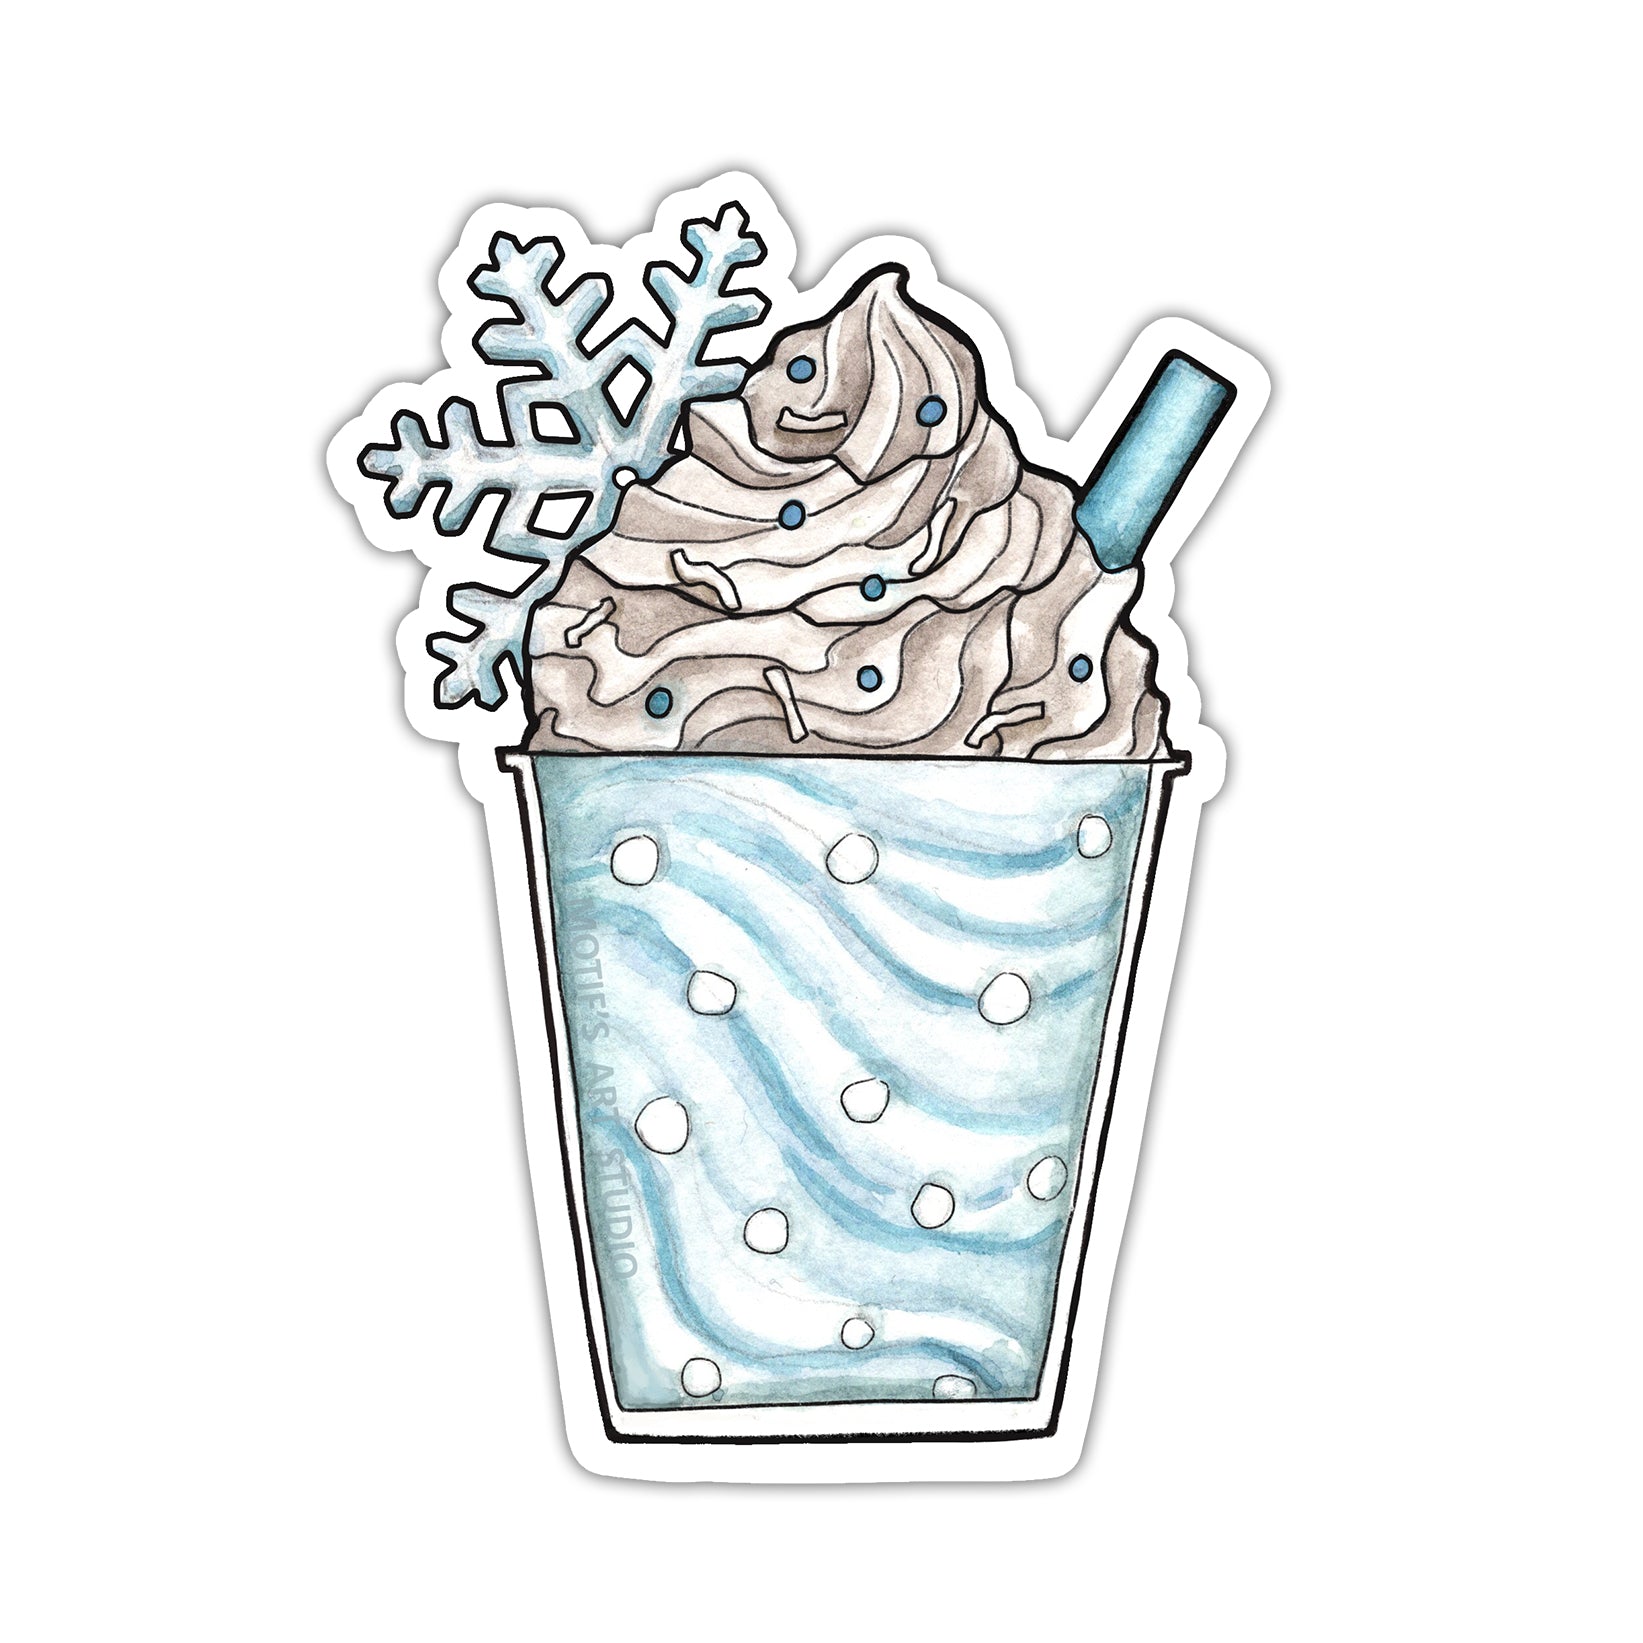 Sticker of a blue boba drink with snow inside and topped with a snowflake and coconut.